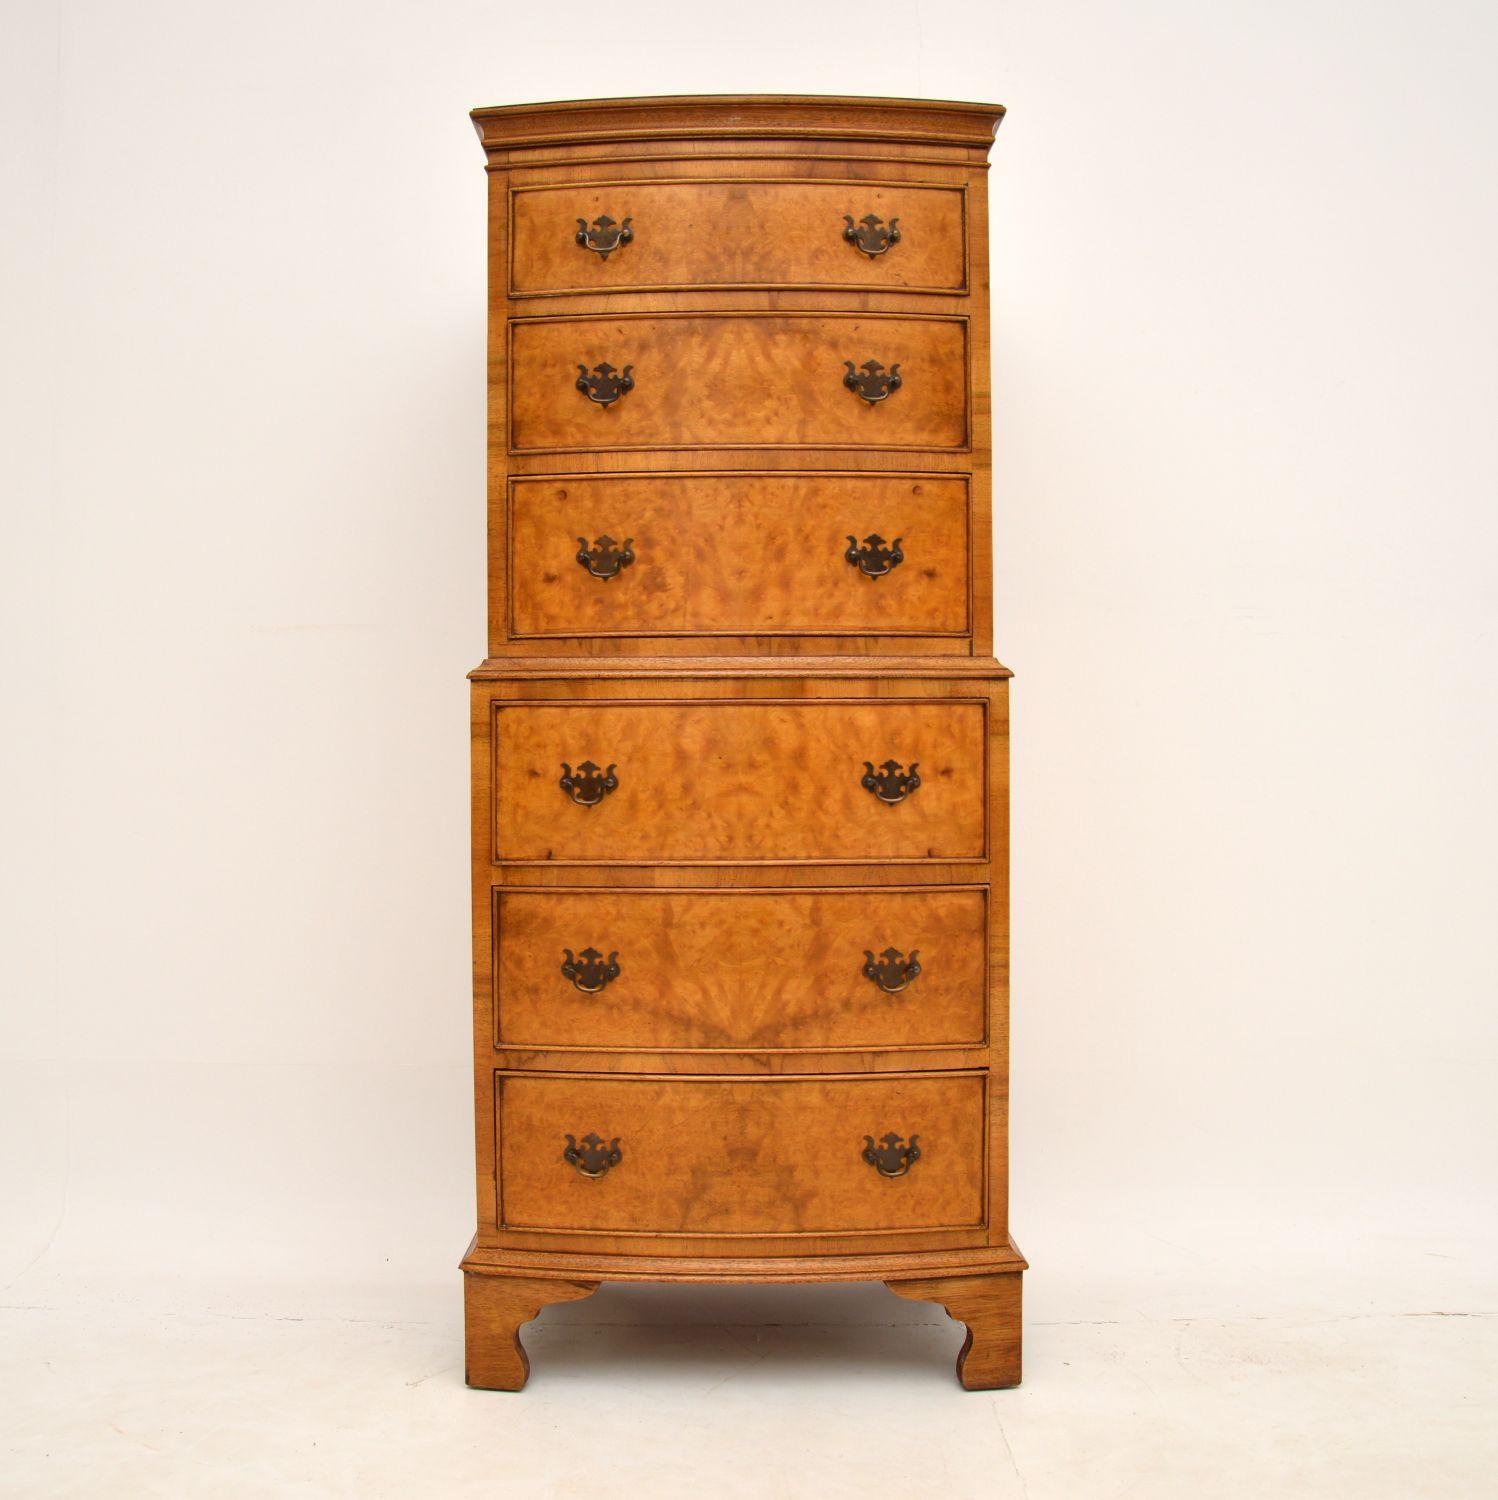 A gorgeous burr walnut chest on chest of drawers, in the antique Georgian style, dating from around the 1930’s period.

The quality is lovely, this has beautiful burr walnut veneers and original brass handles. It is of lovely proportions, the